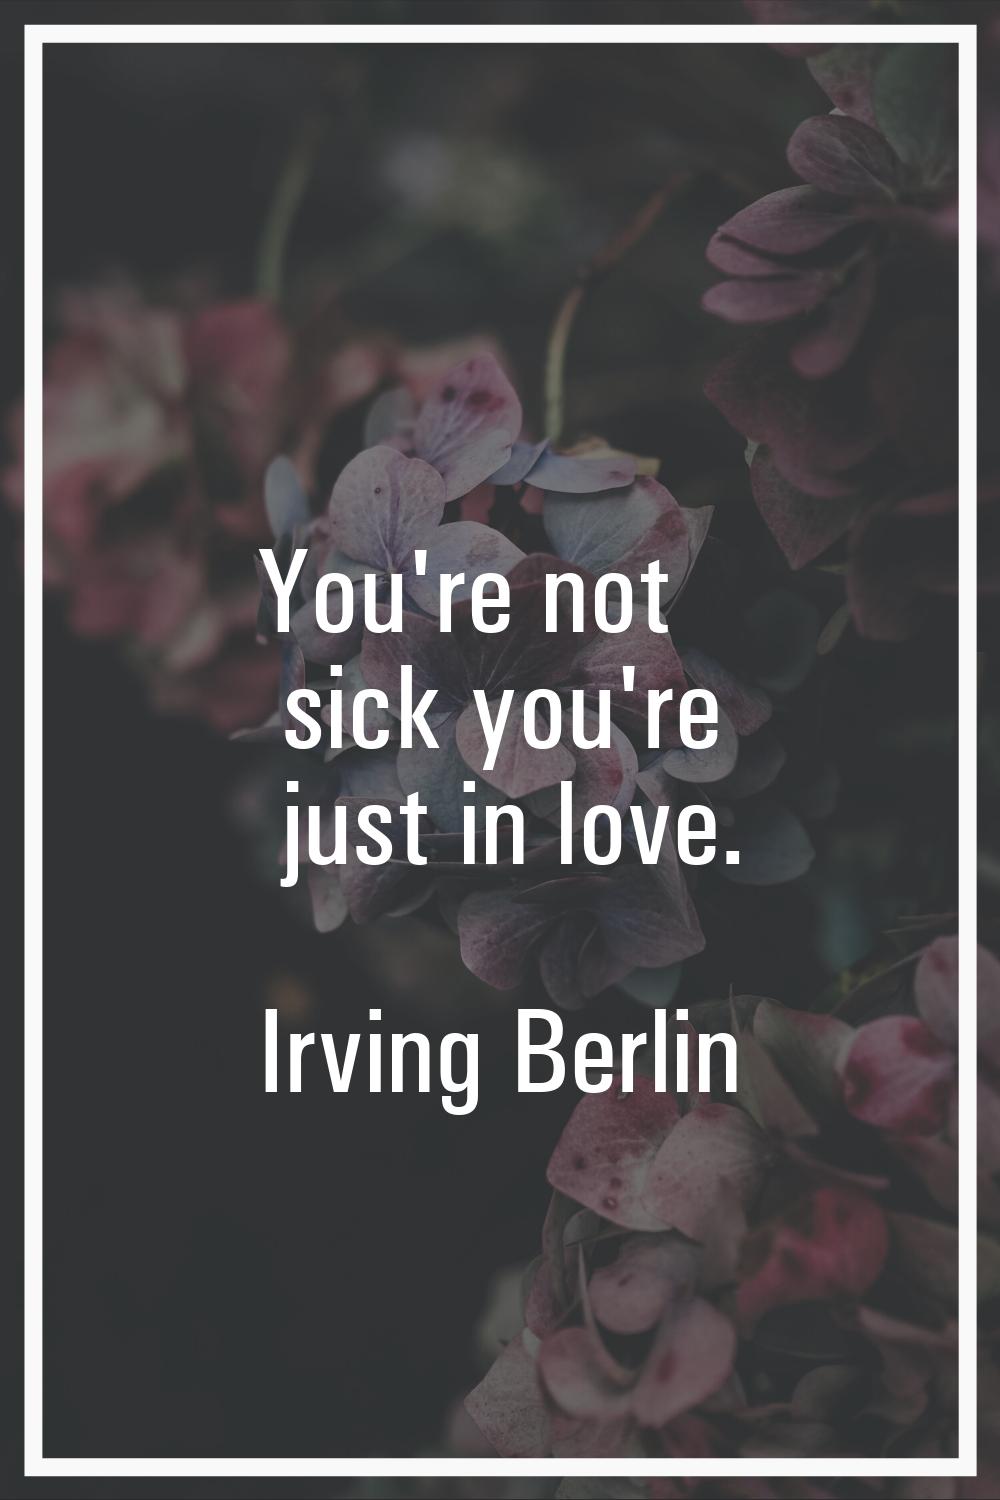 You're not sick you're just in love.